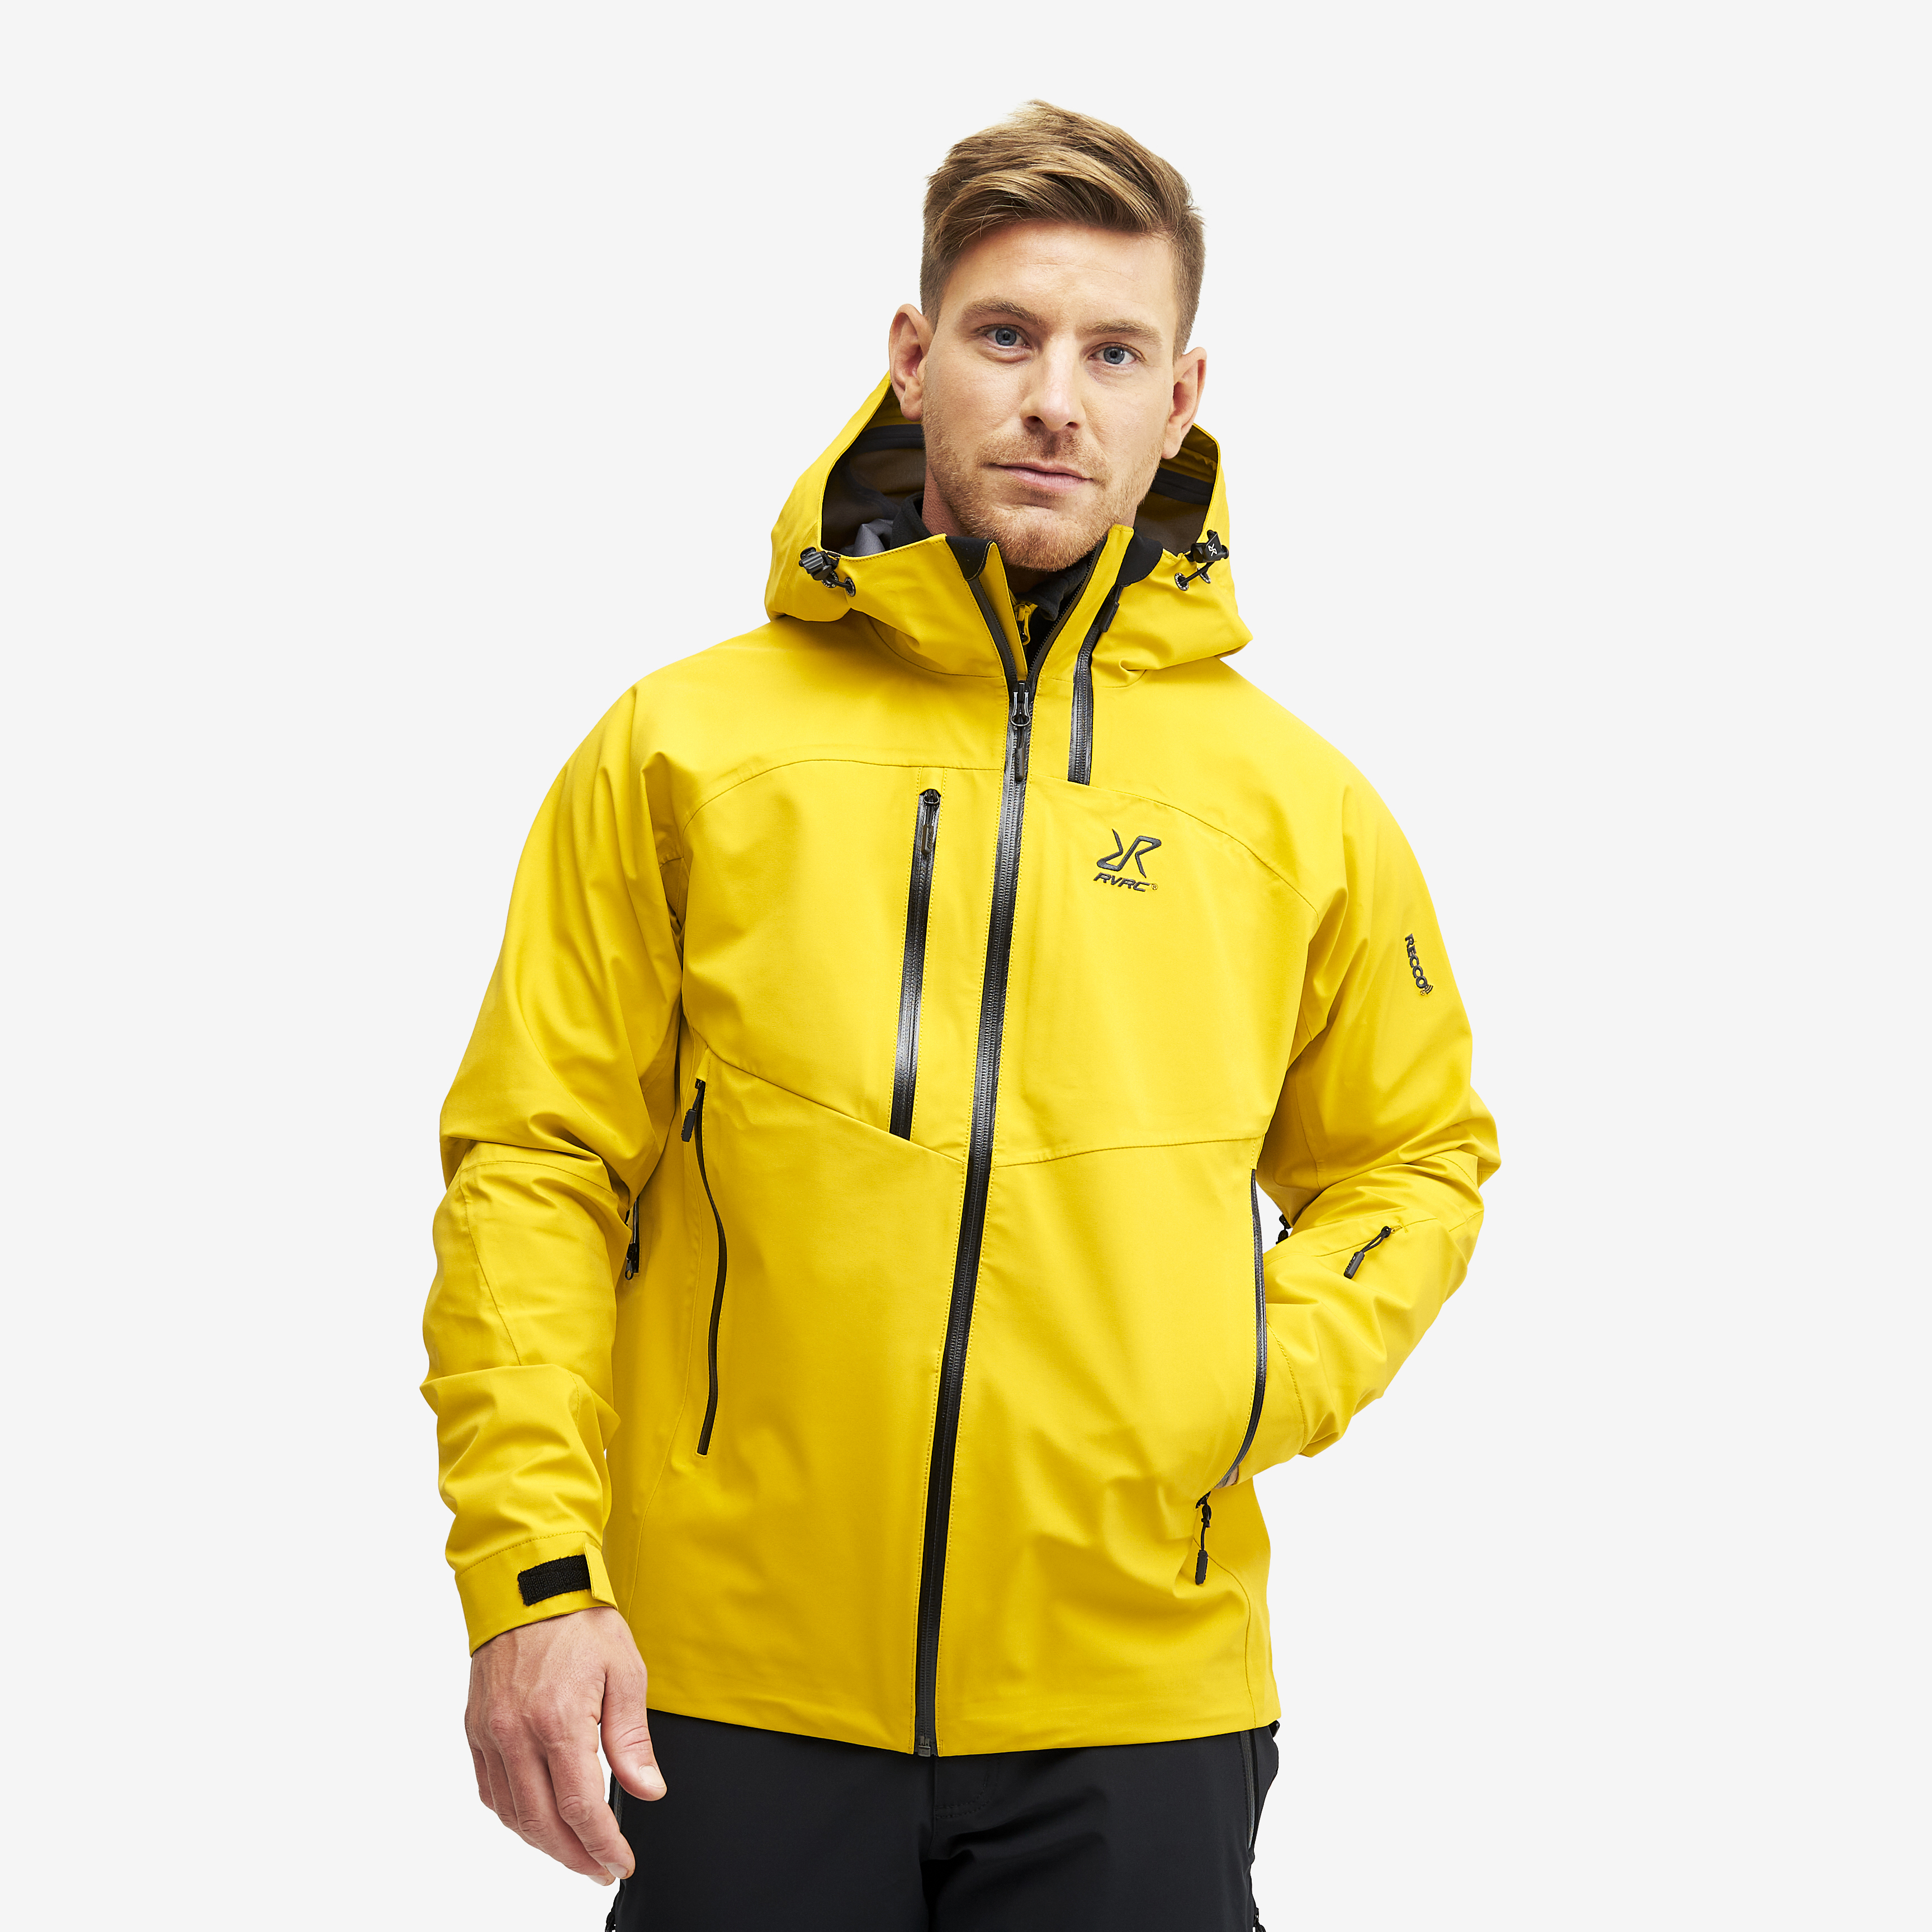 Cyclone Rescue Jacket 2.0 Lemon Curry